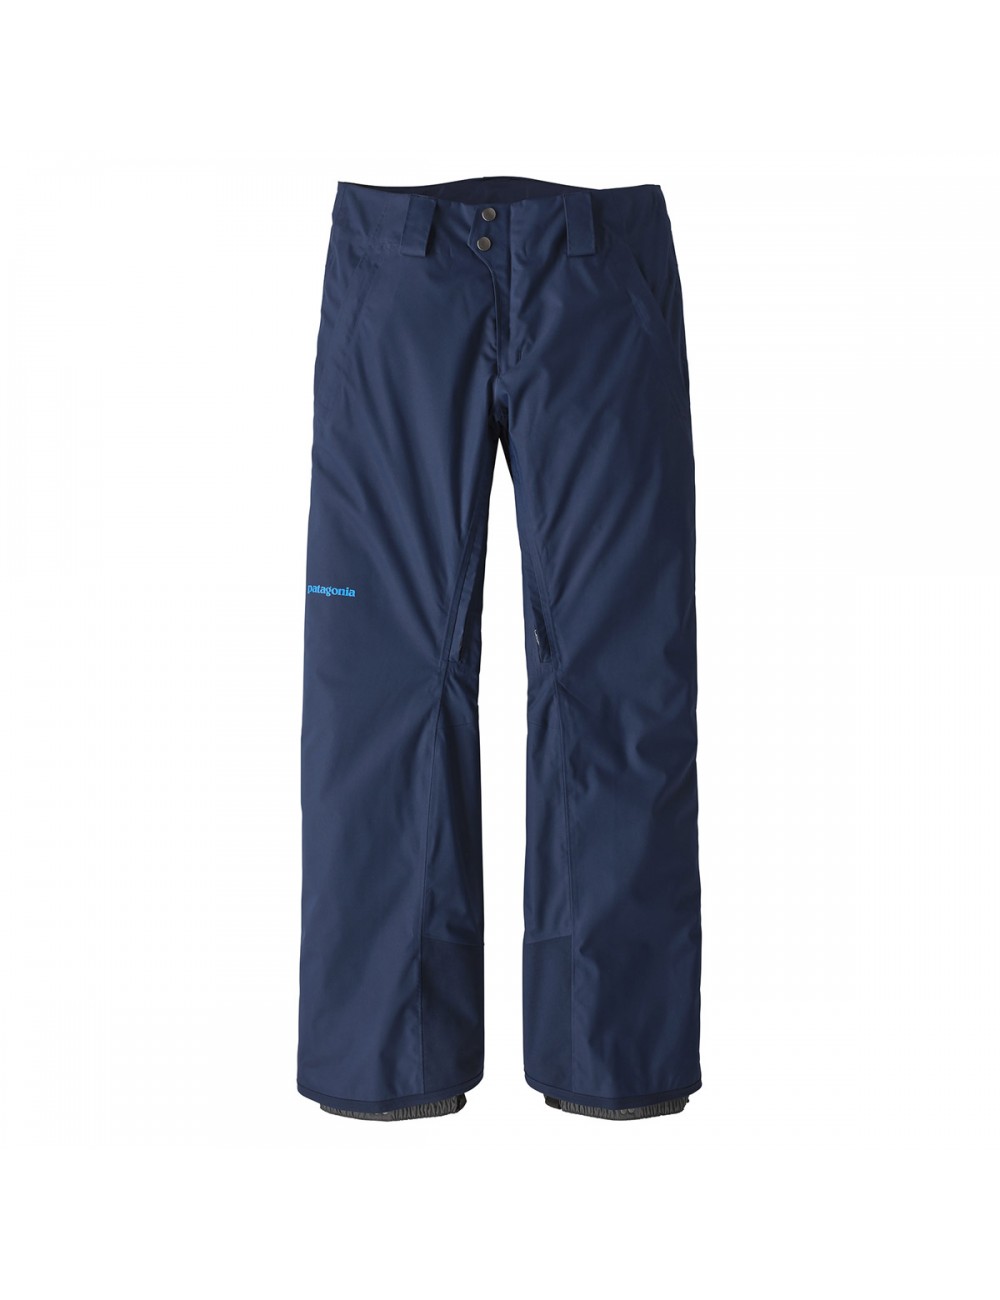 Patagonia Snowbelle Stretch Pants - Navy